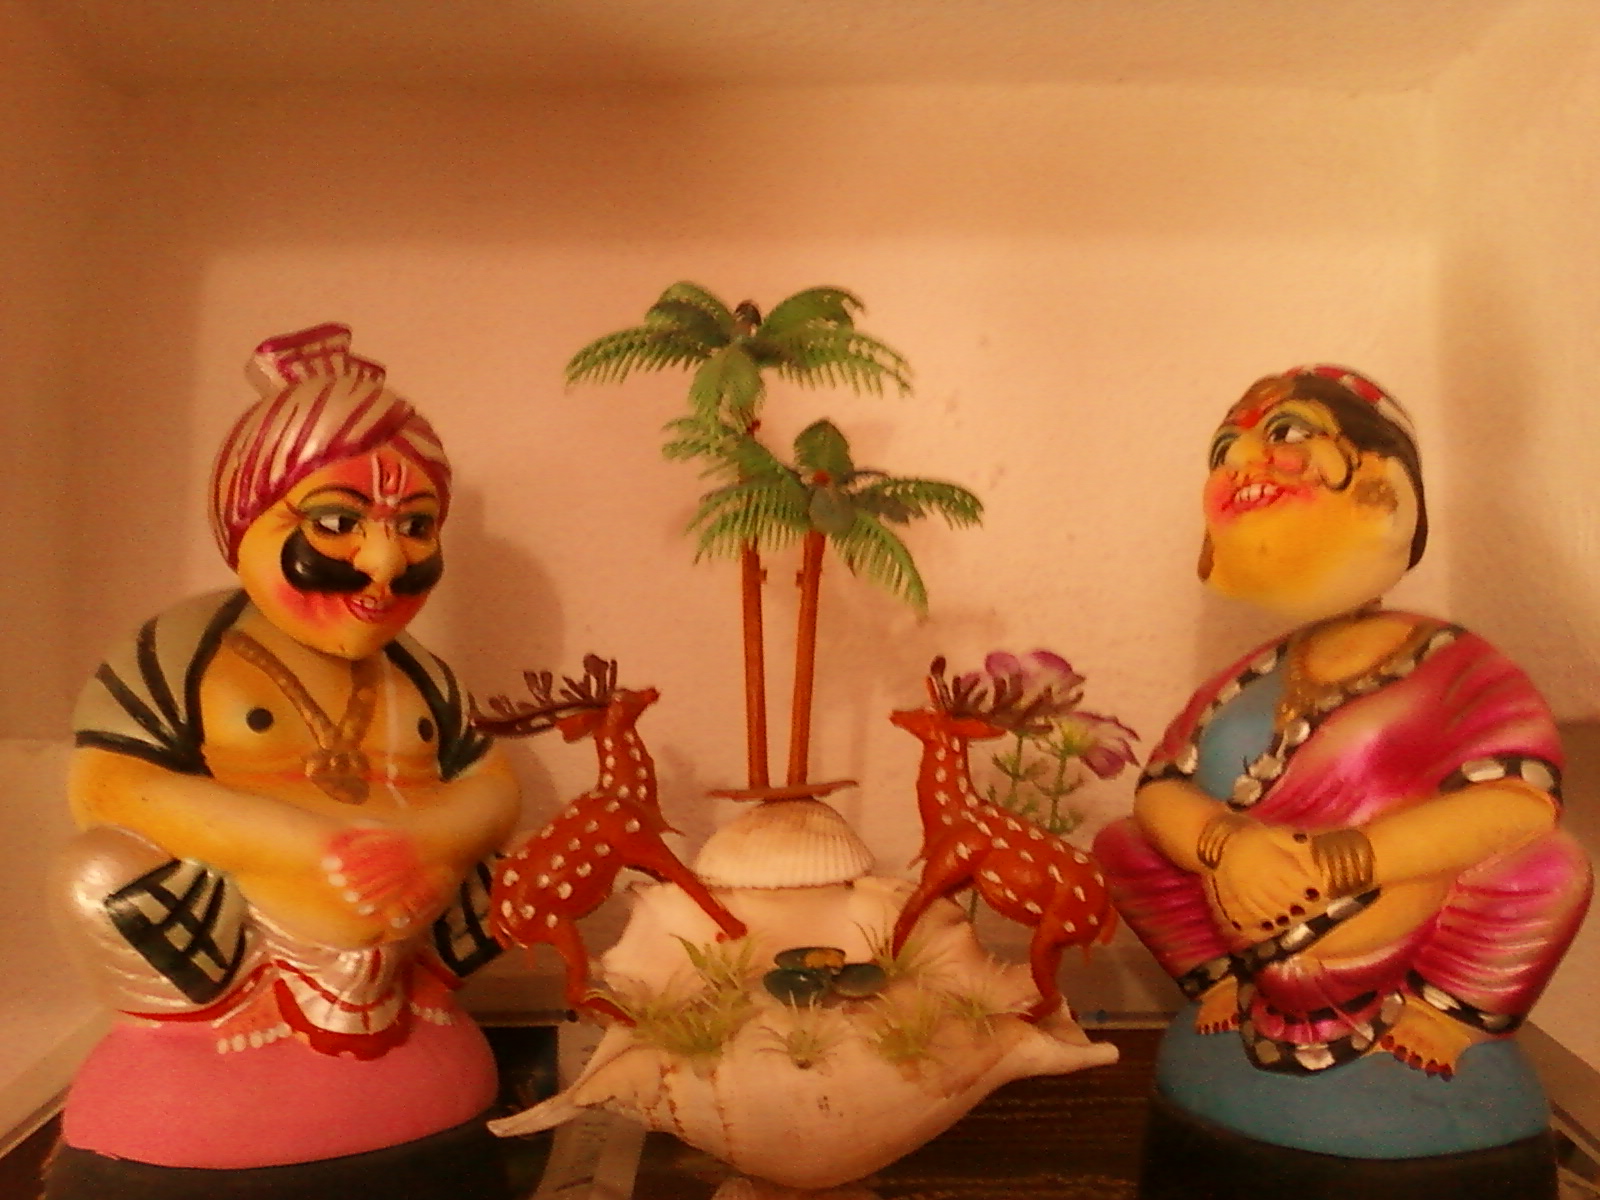 clay toys in tamil